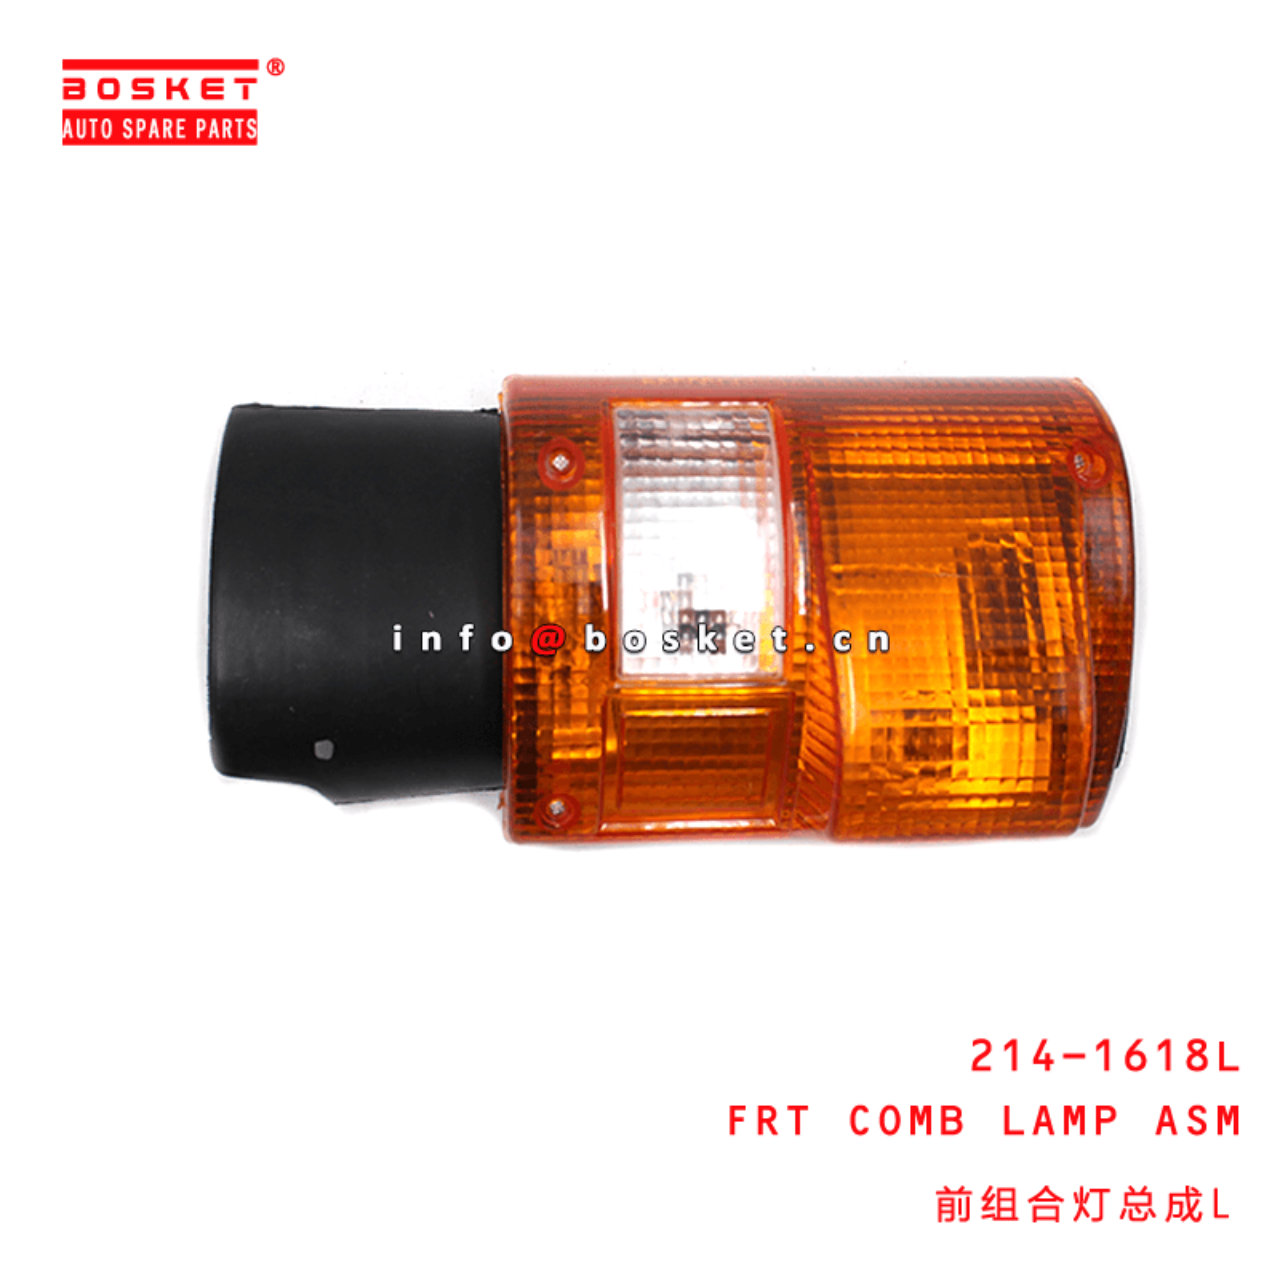 214-1618L Front Combination Lamp Assembly Suitable For MITSUBISHI FUSO 